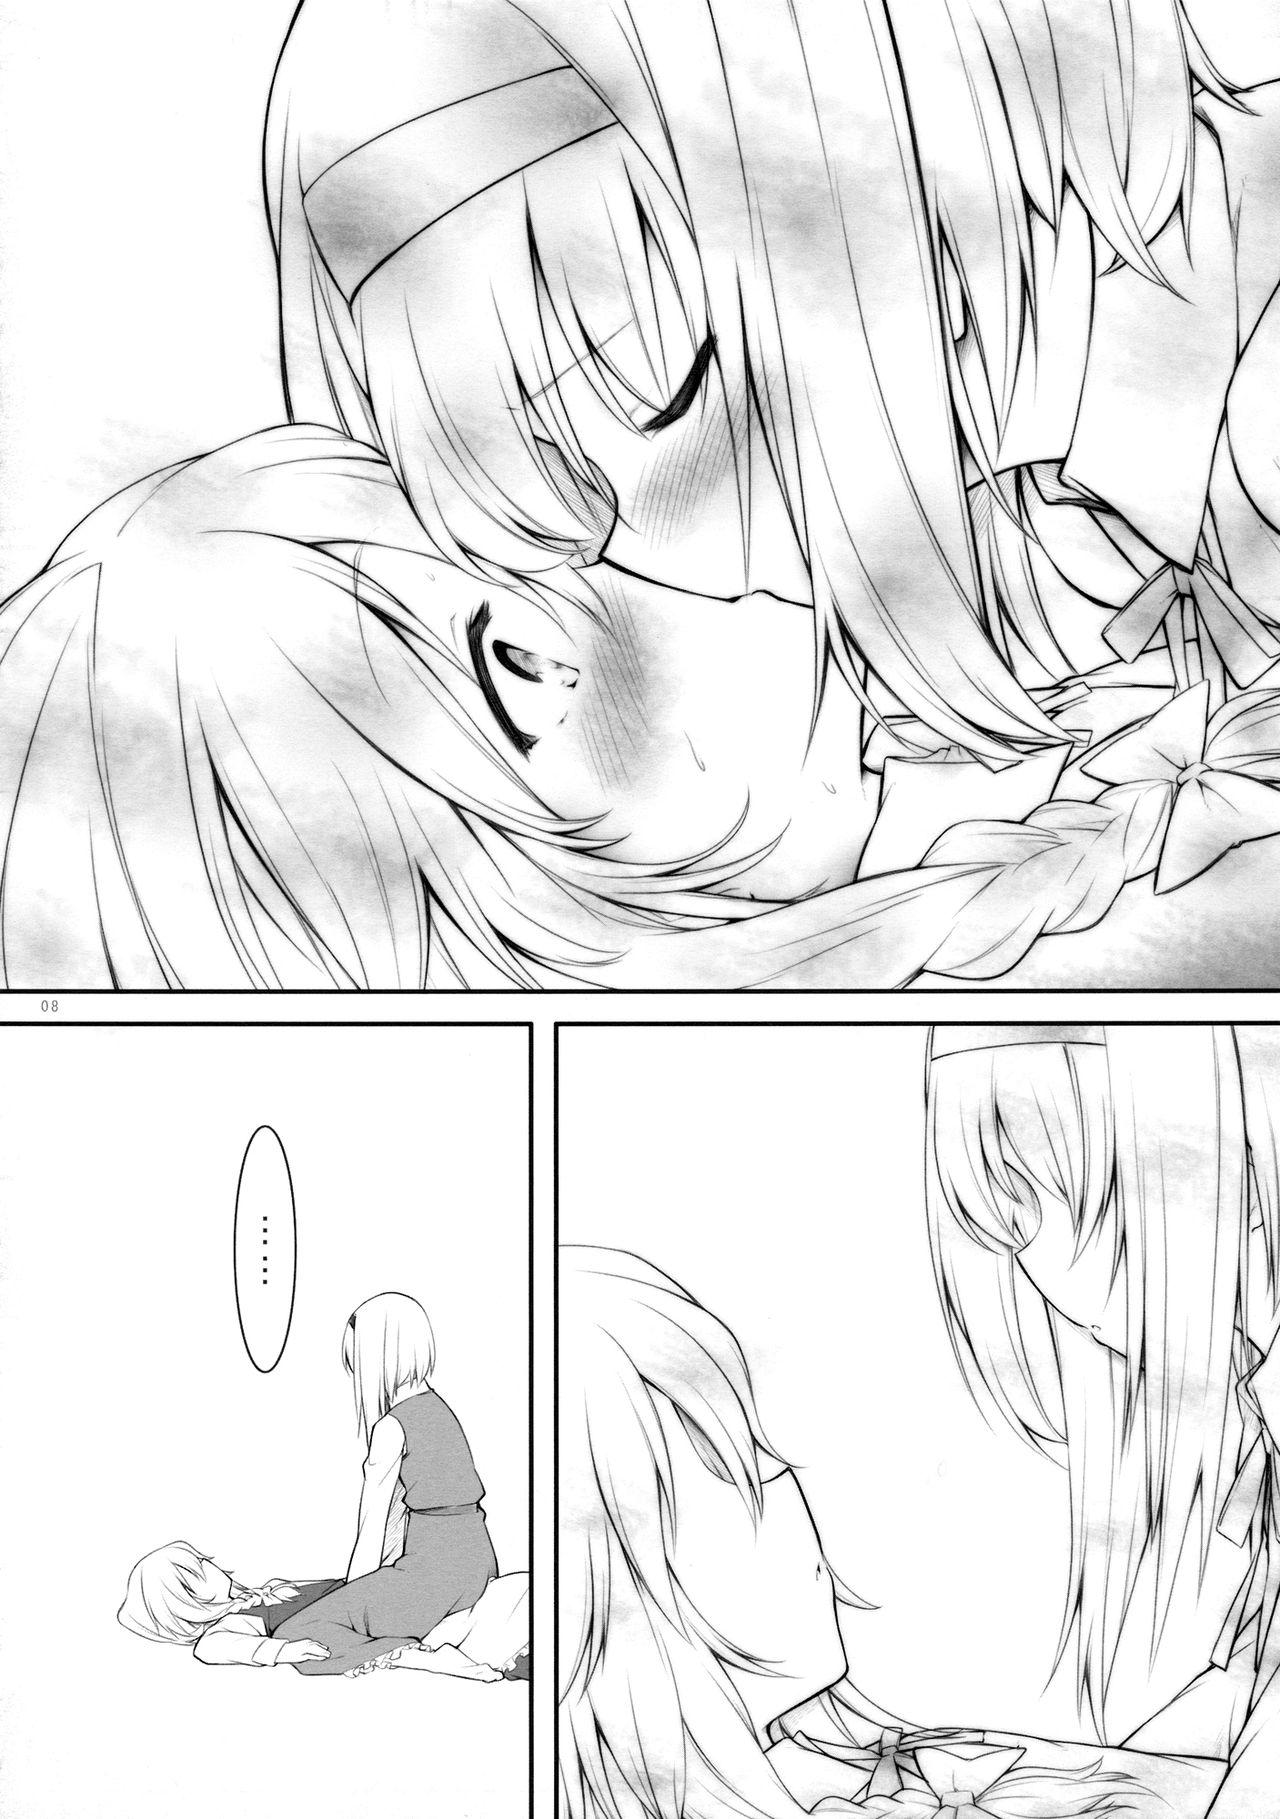 Femboy kiss or kiss? - Touhou project Italian - Page 7